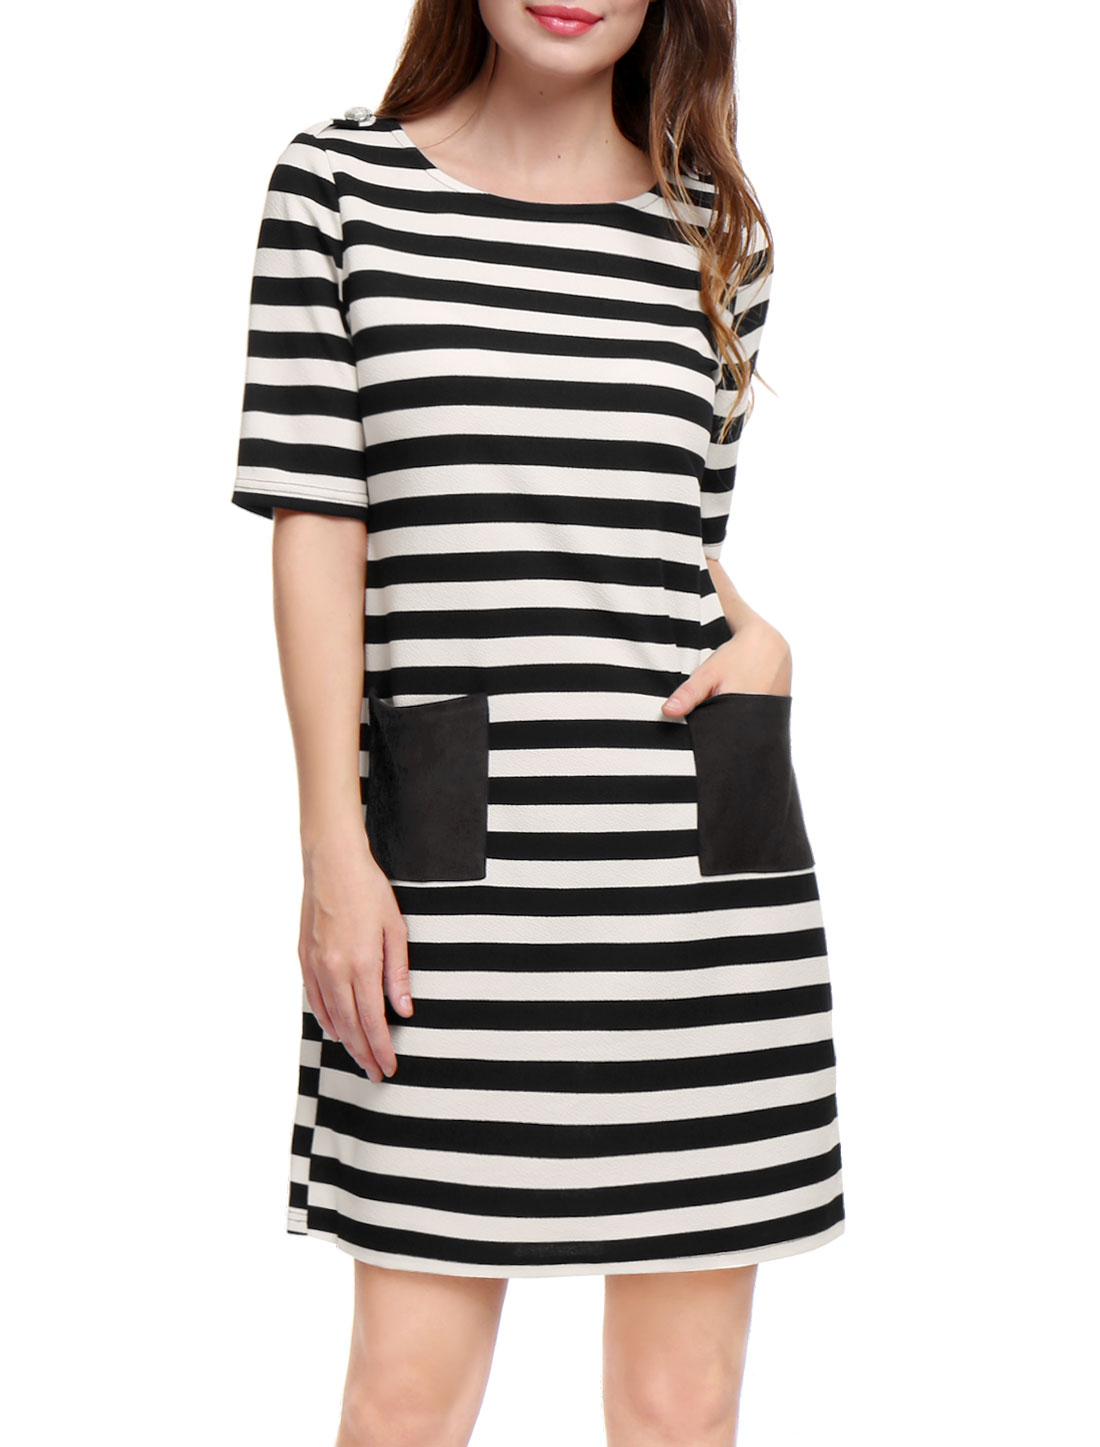 Unique Bargains Woman Half Sleeves Contrast Pockets Above knee Striped Dress Black XS